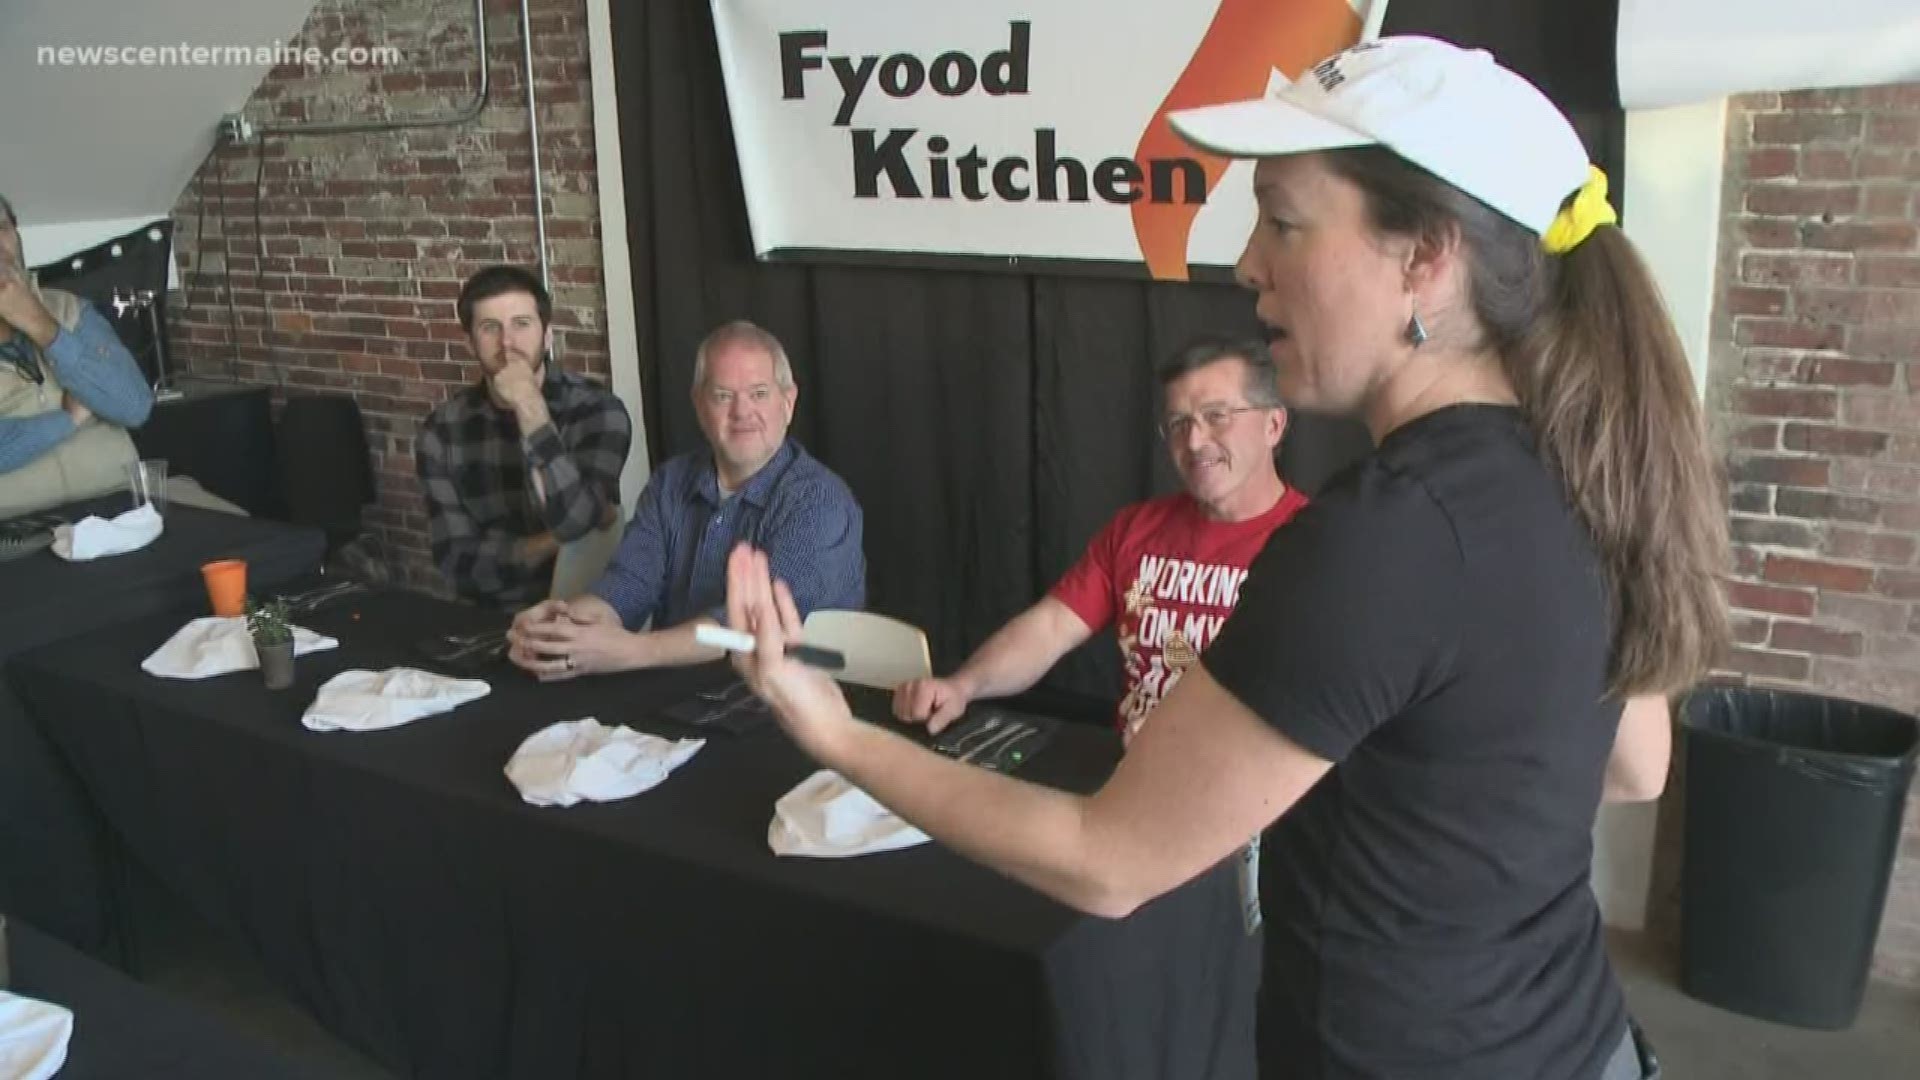 Compete against your friends in a cooking competition at Fyood Kitchen.